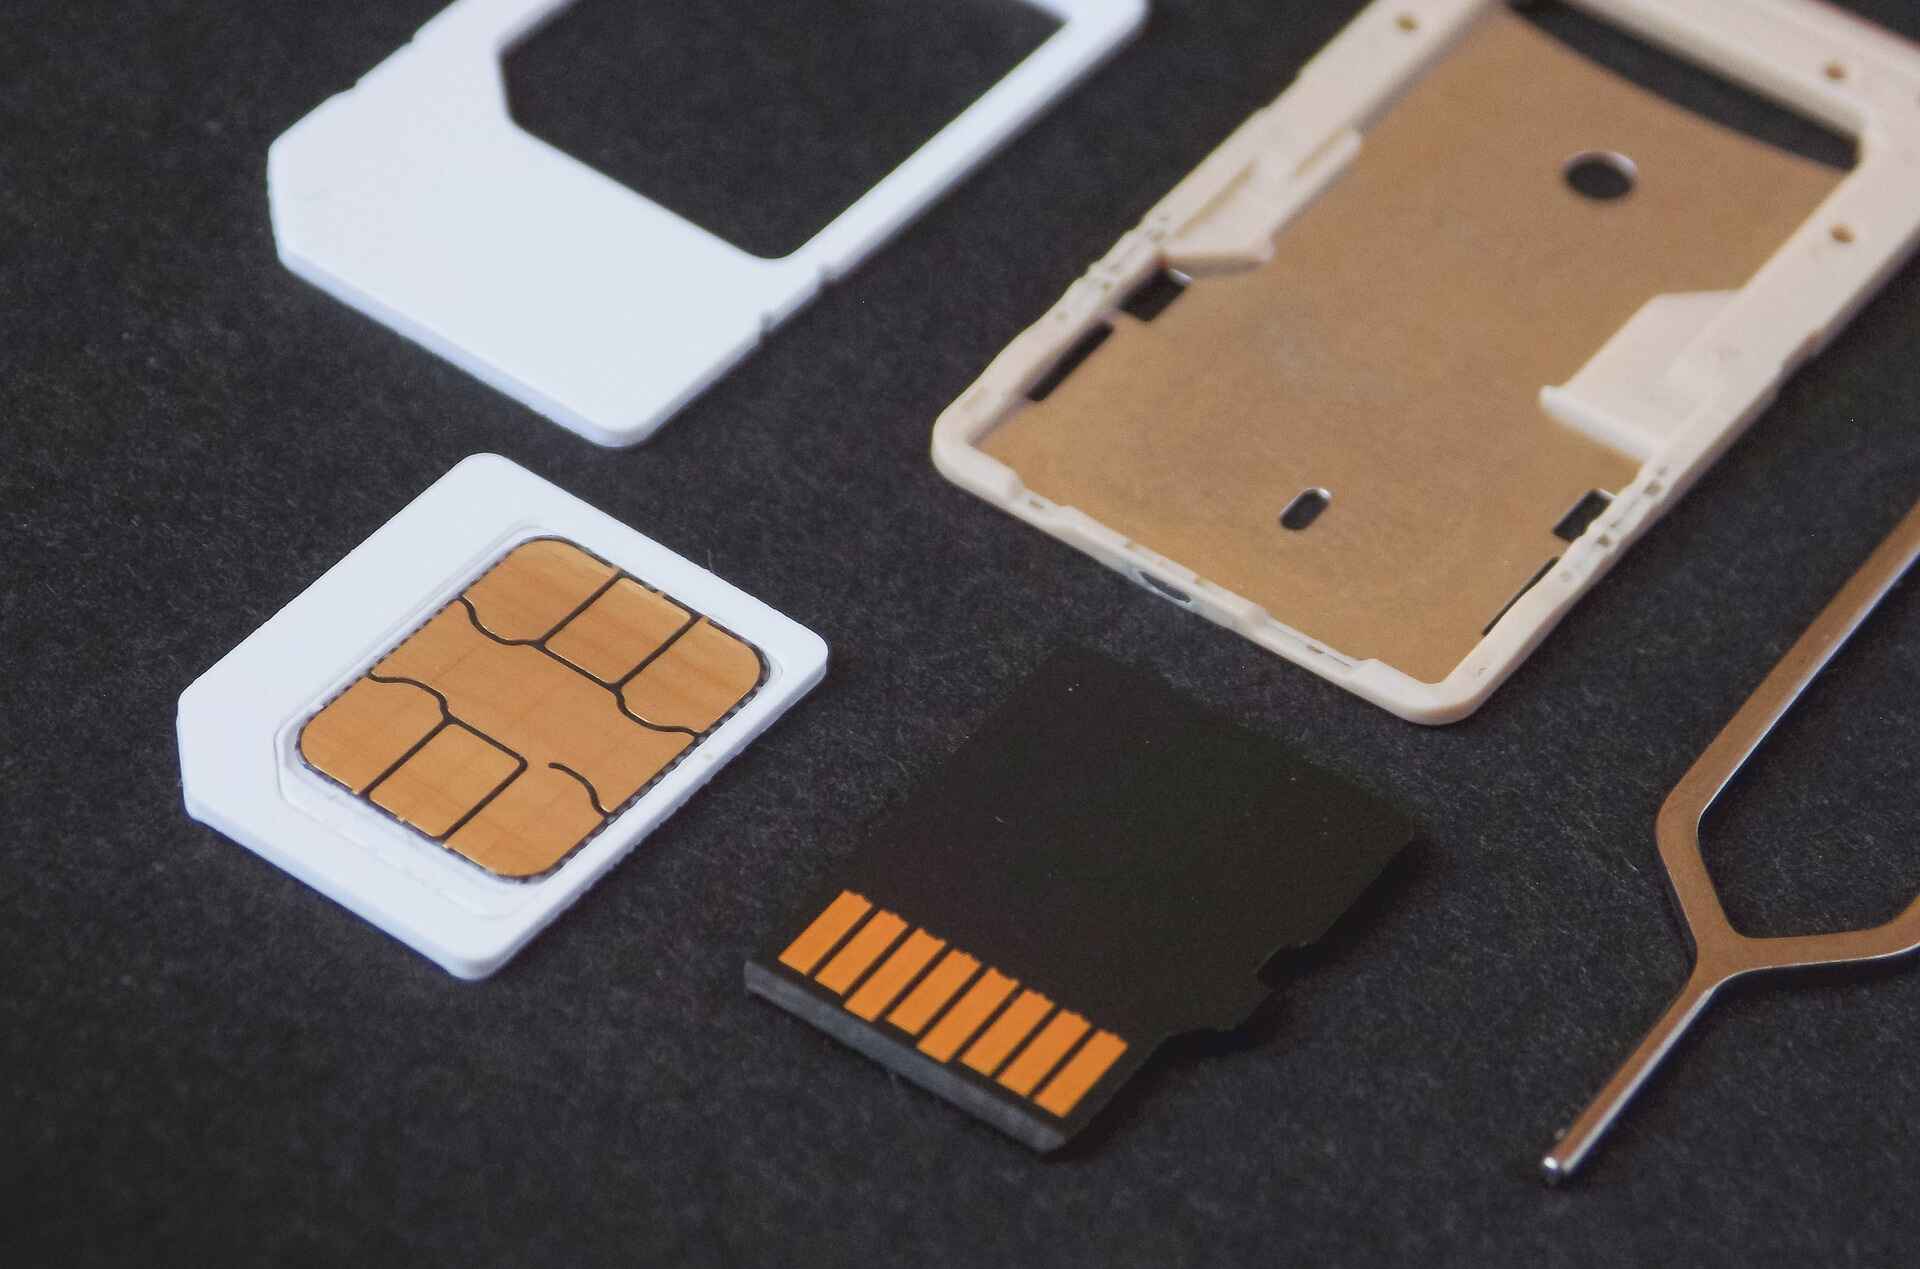 Activation Without A SIM Card: IPhone Essentials